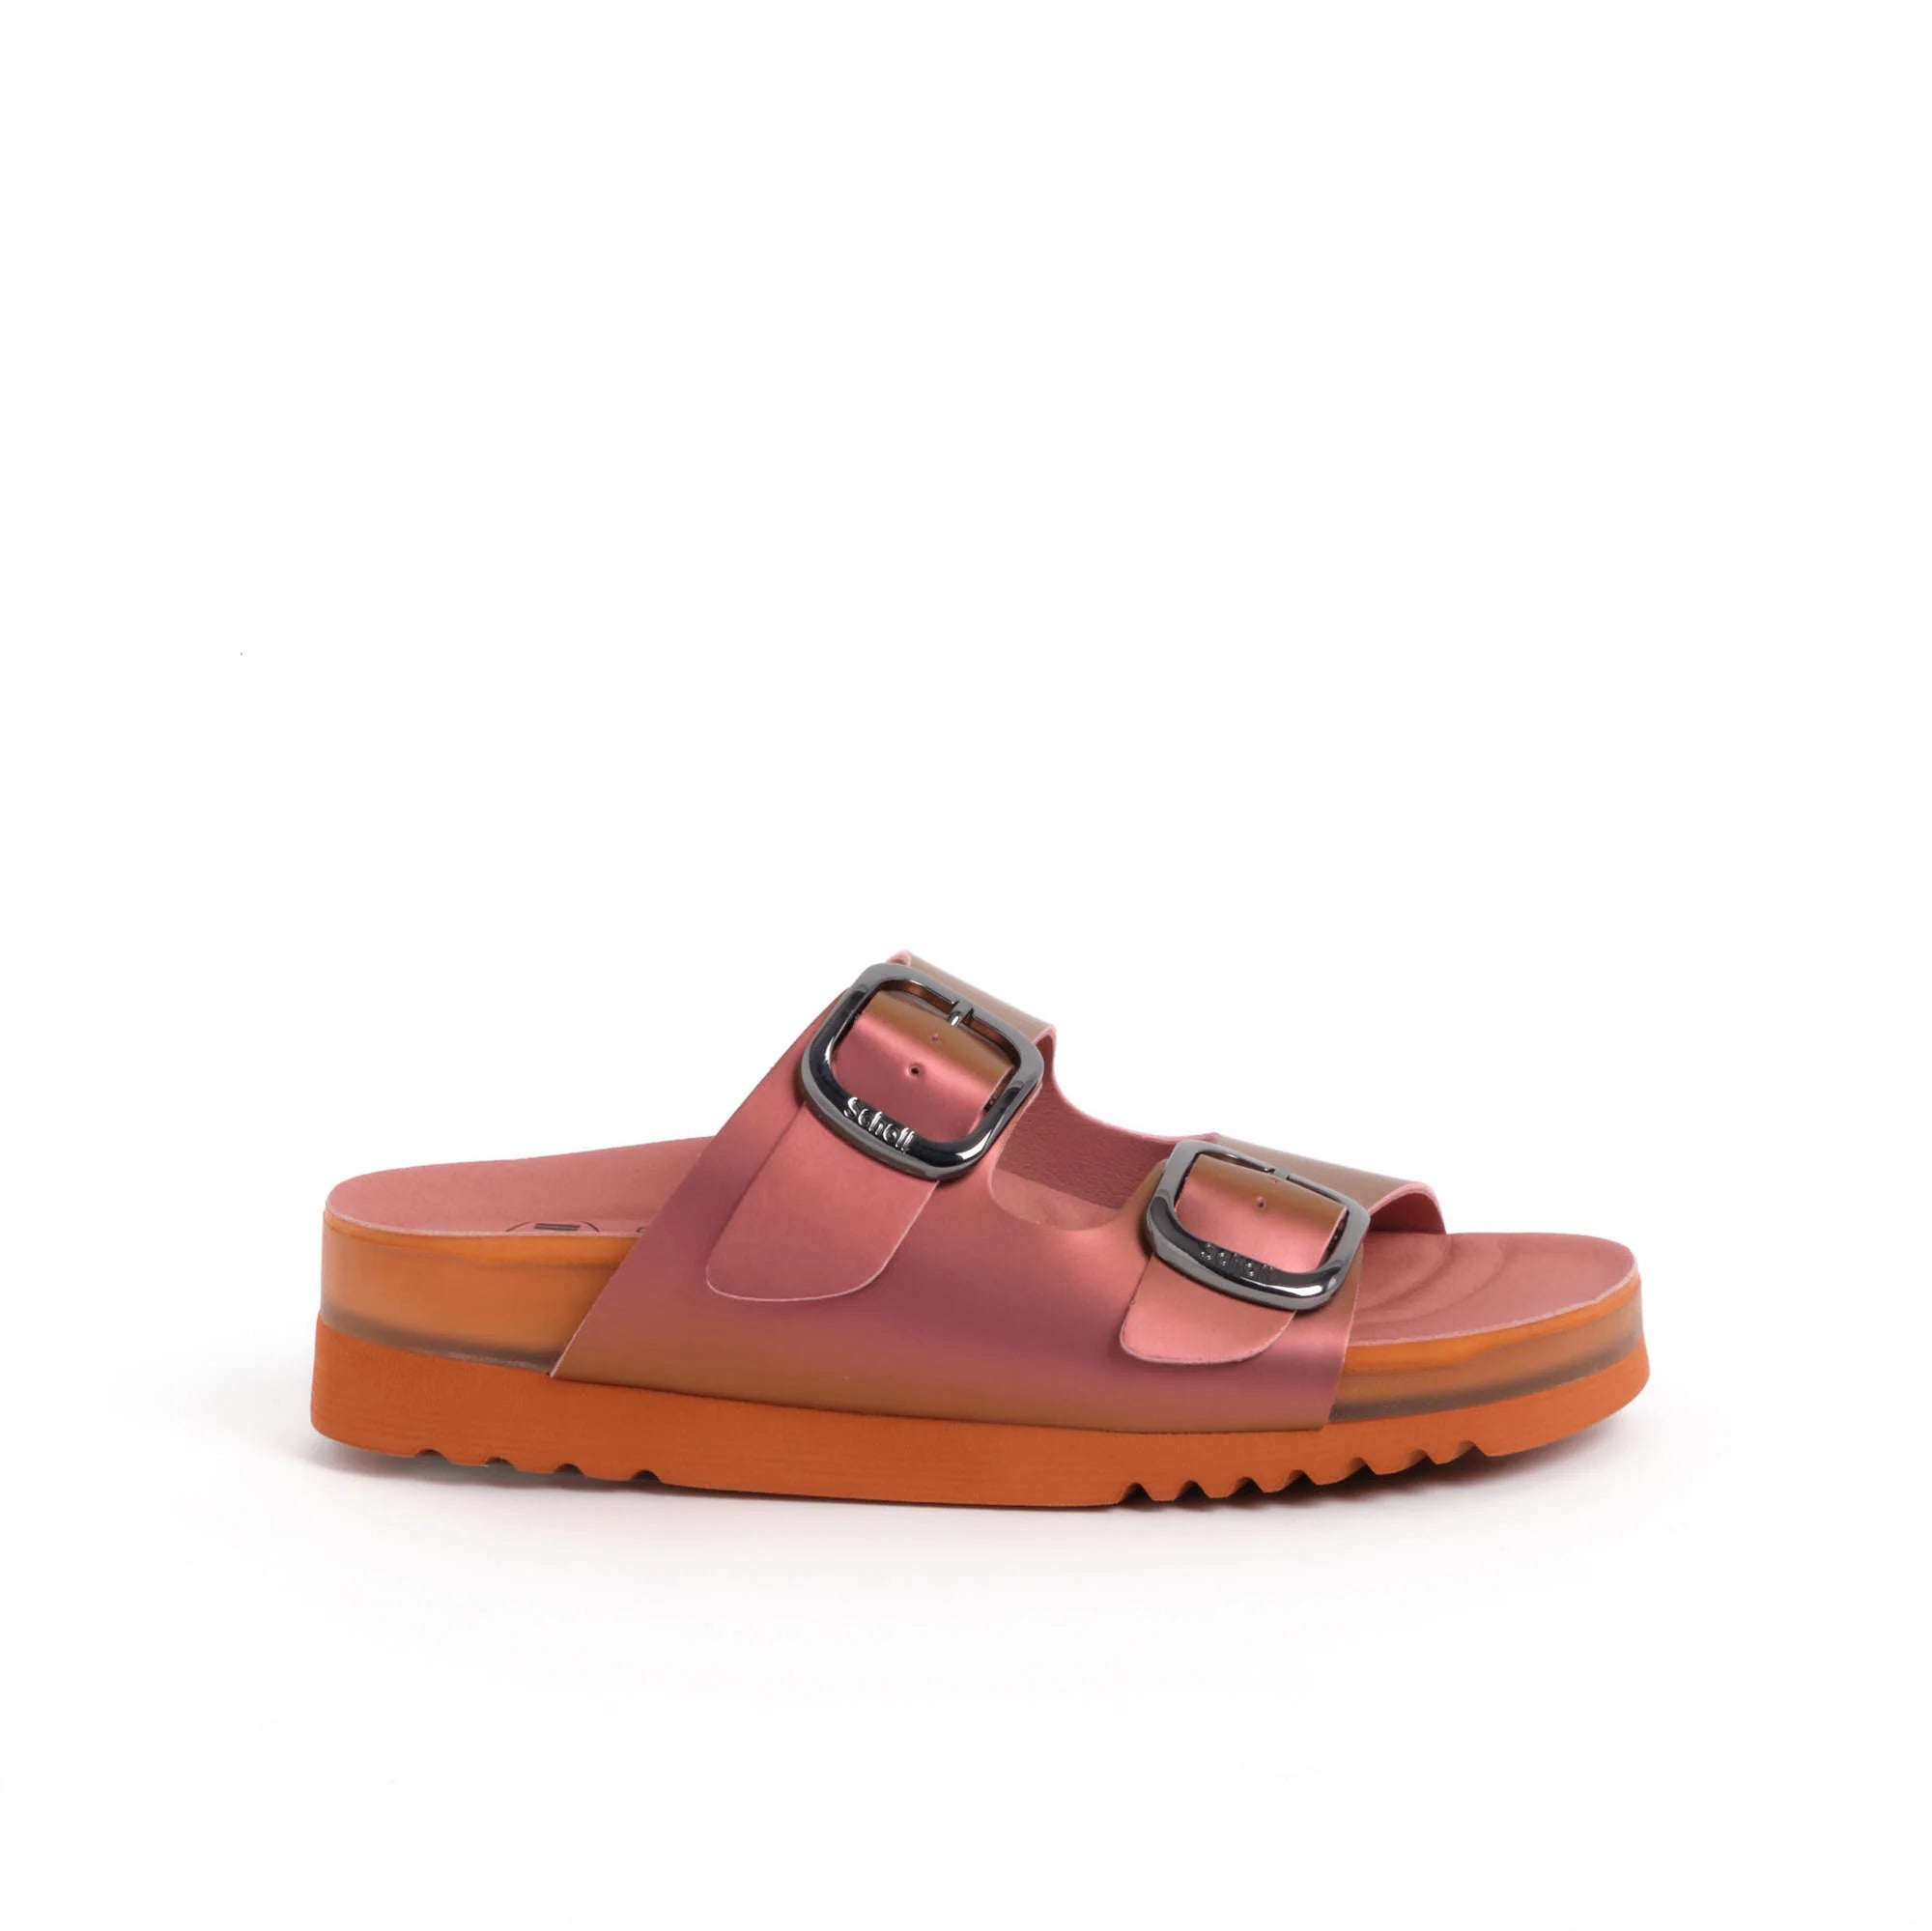 Vally Mules Synthetic Iridescent Orange N. 41 - Vally Mules Synthetic Iridescent Orange N. 41